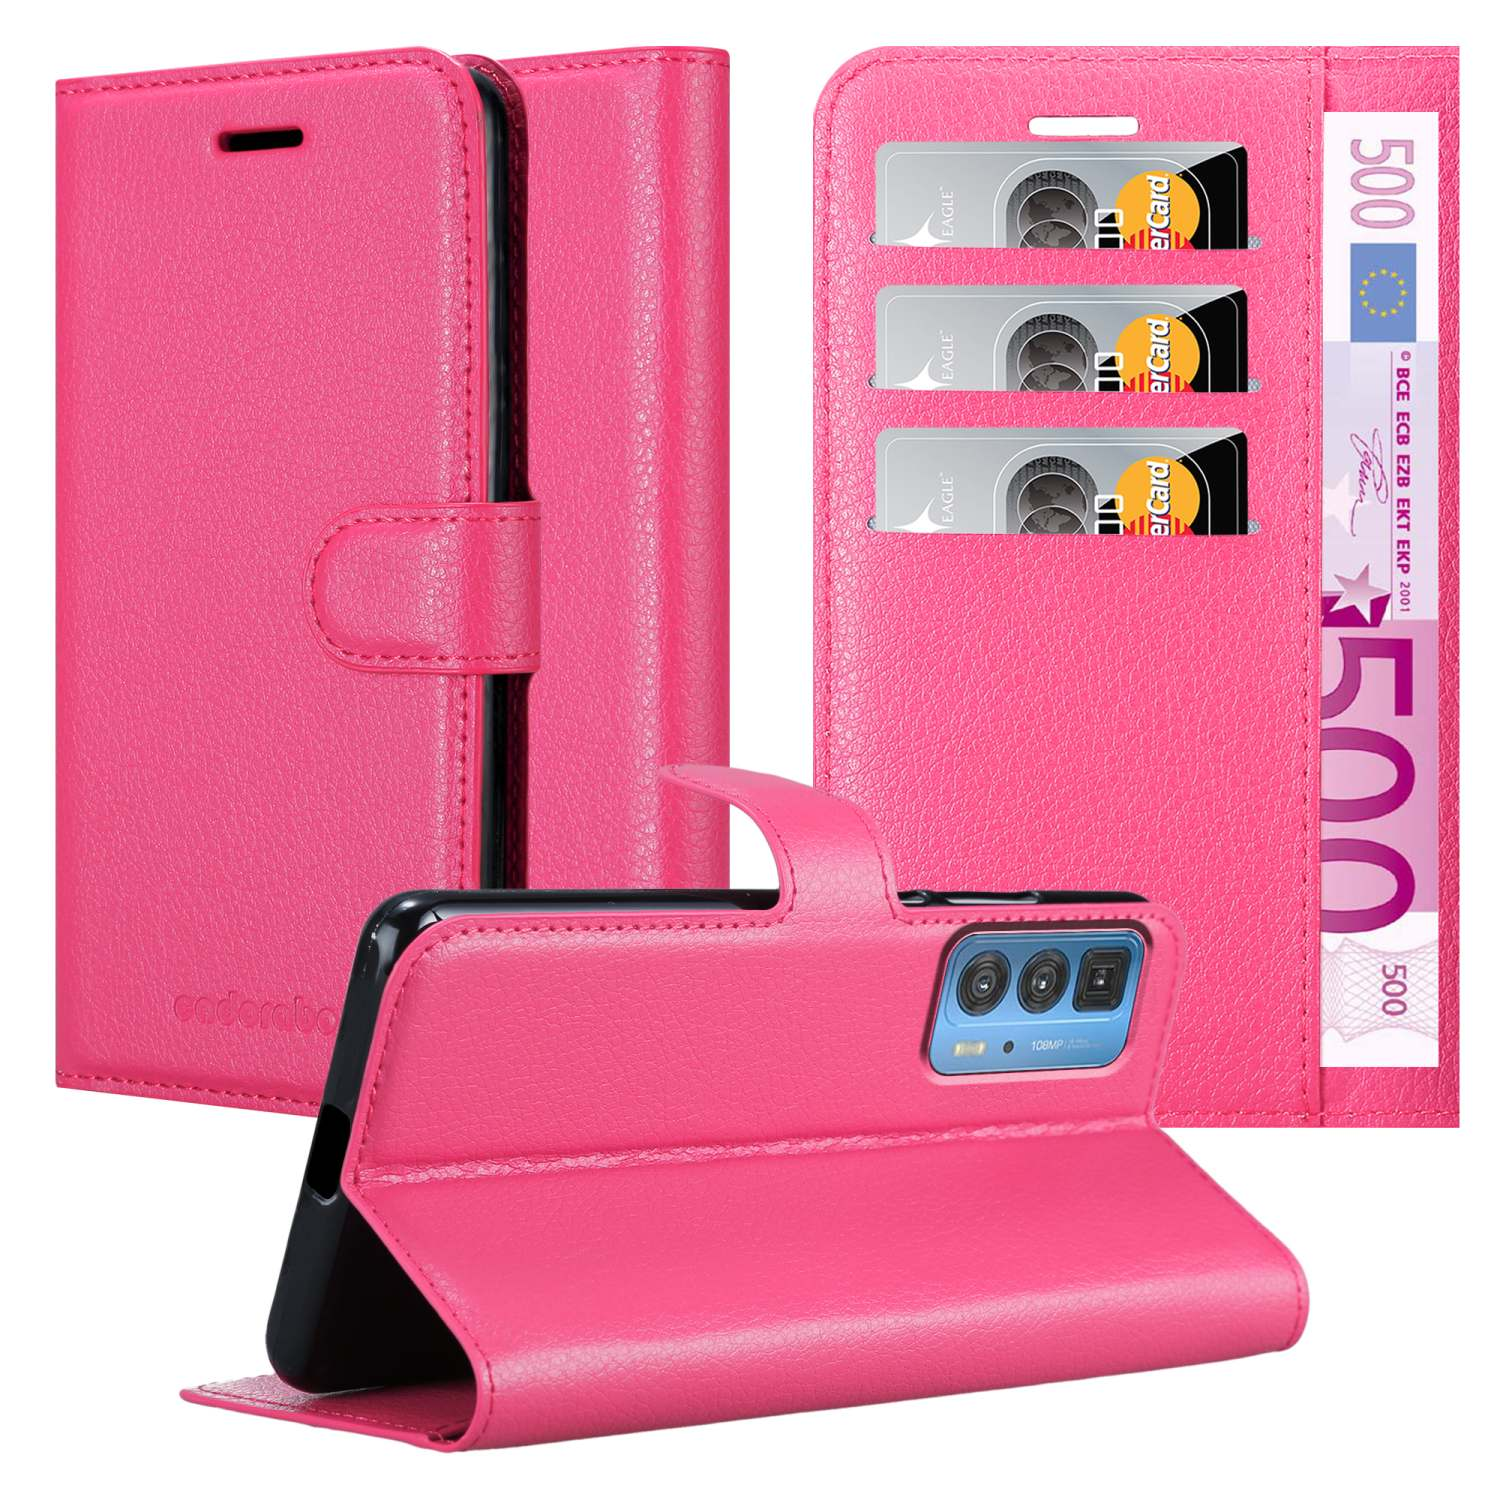 S Book Bookcover, PRO, CADORABO / EDGE Motorola, CHERRY EDGE 20 PRO Hülle PINK Standfunktion,